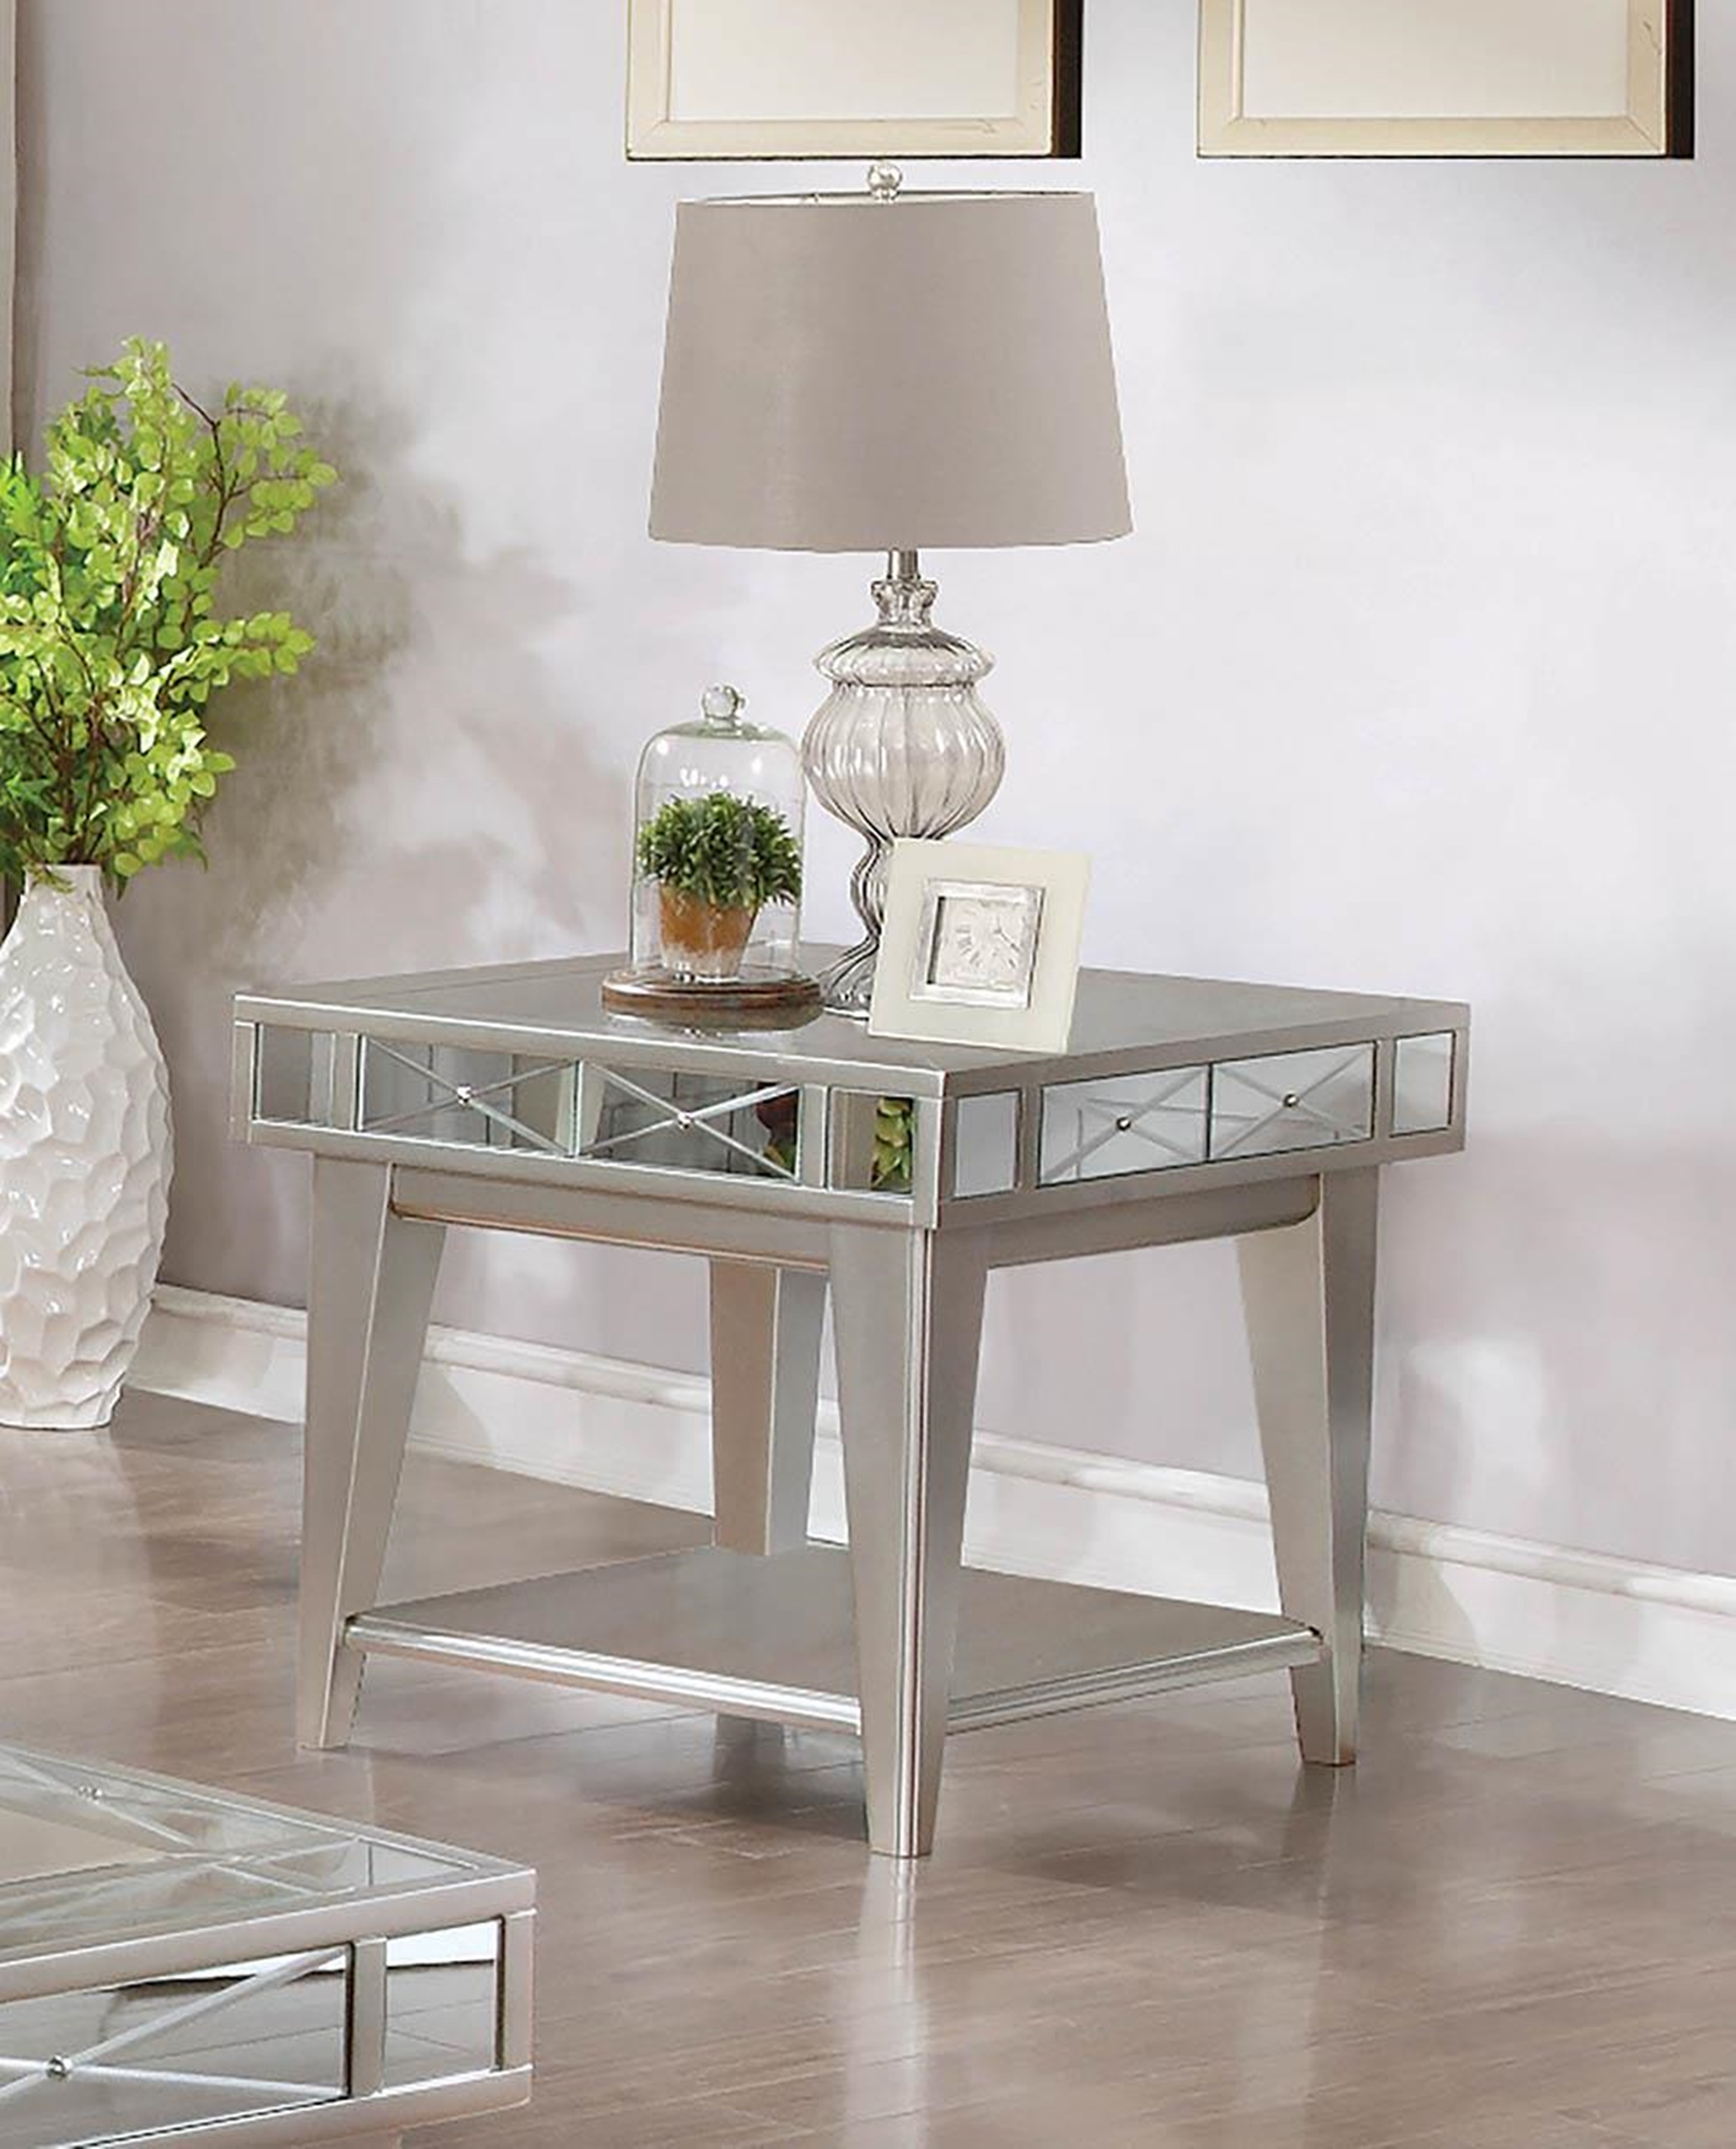 Bling Mirrored End Table - Click Image to Close